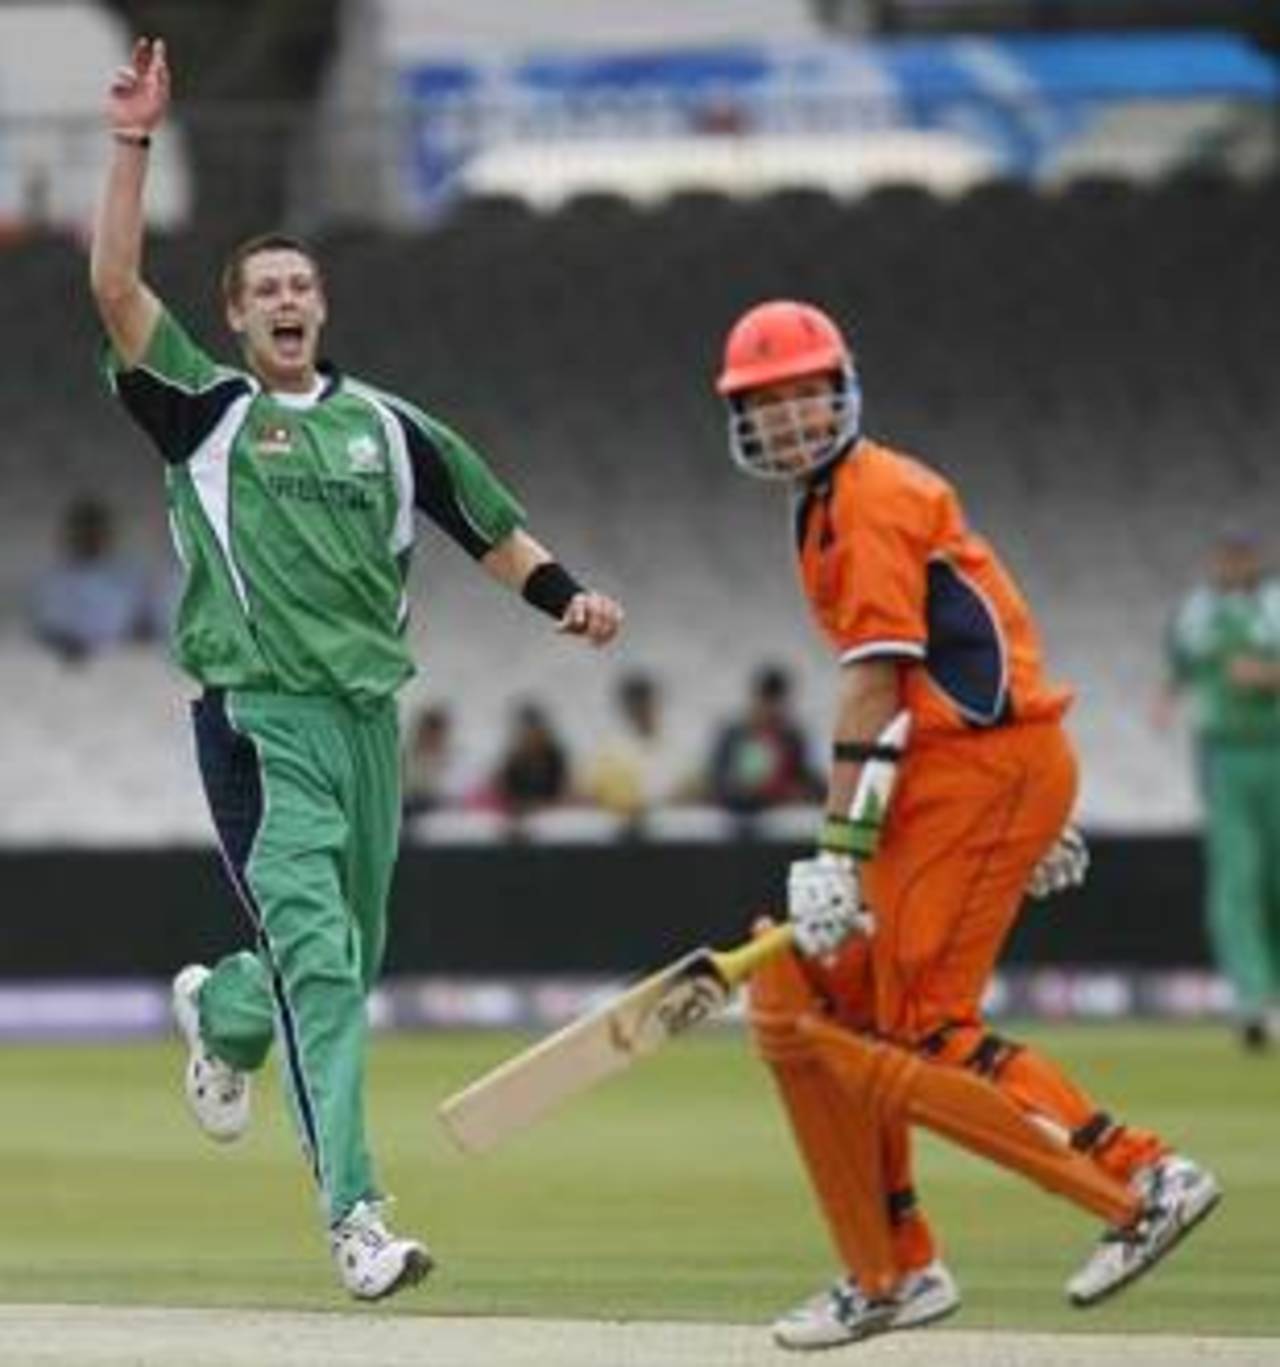 Boyd Rankin removes Dirk Nannes late in the innings, Ireland v Netherlands, ICC World Twenty20 warm-up match, Lord's, June 1, 2009